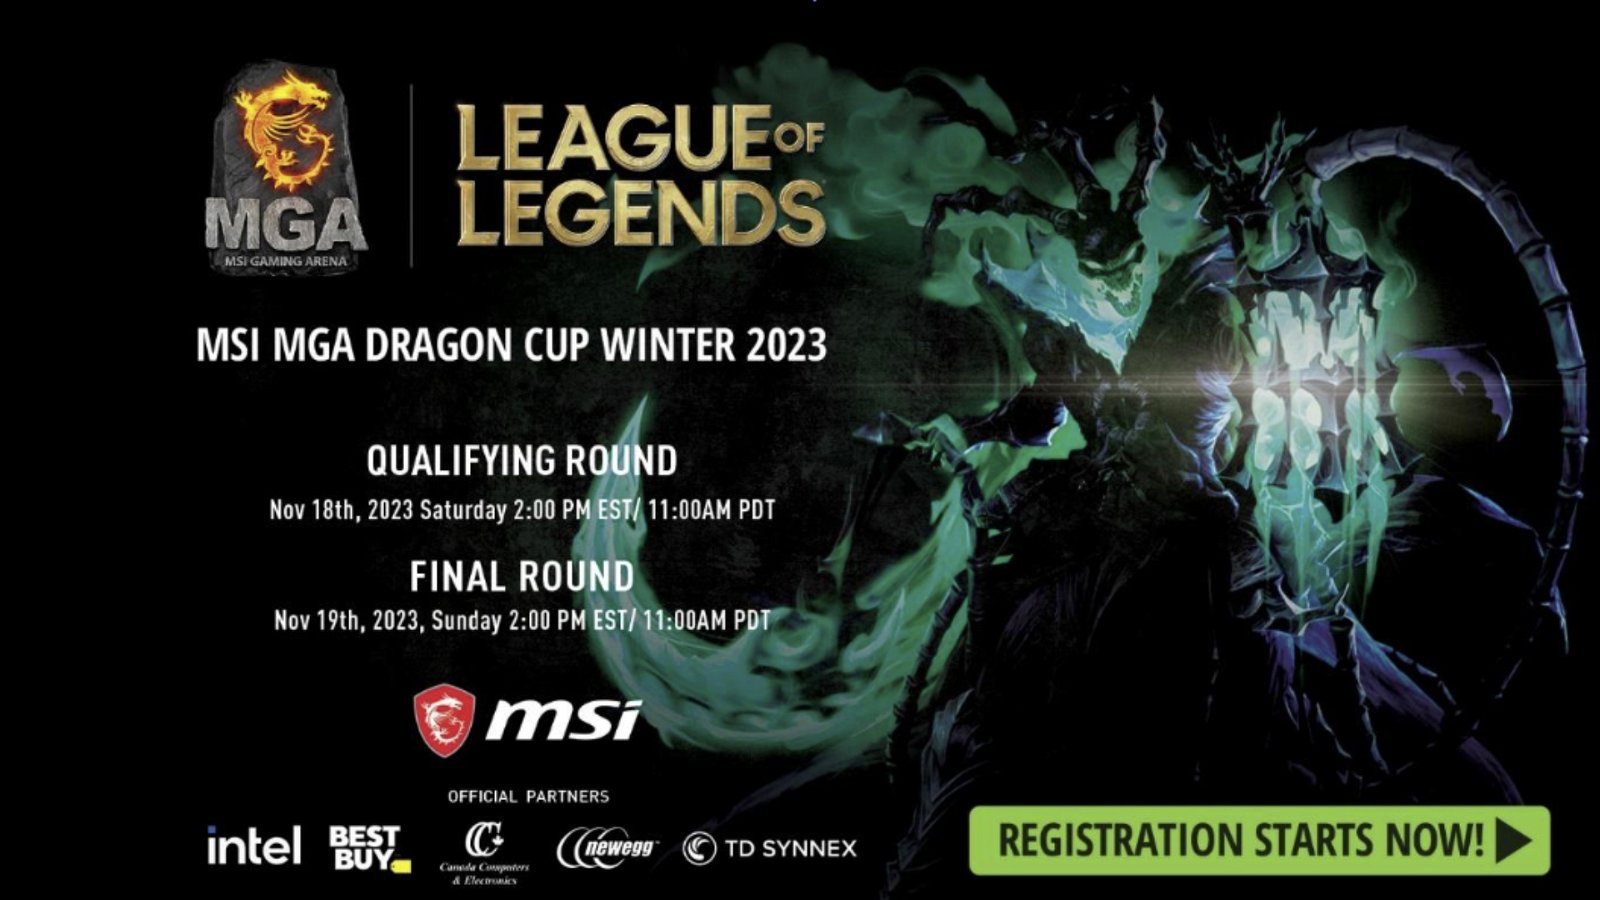 Prime Gaming Presents: League of Legends MSI 2023 Giveaway by Surf!